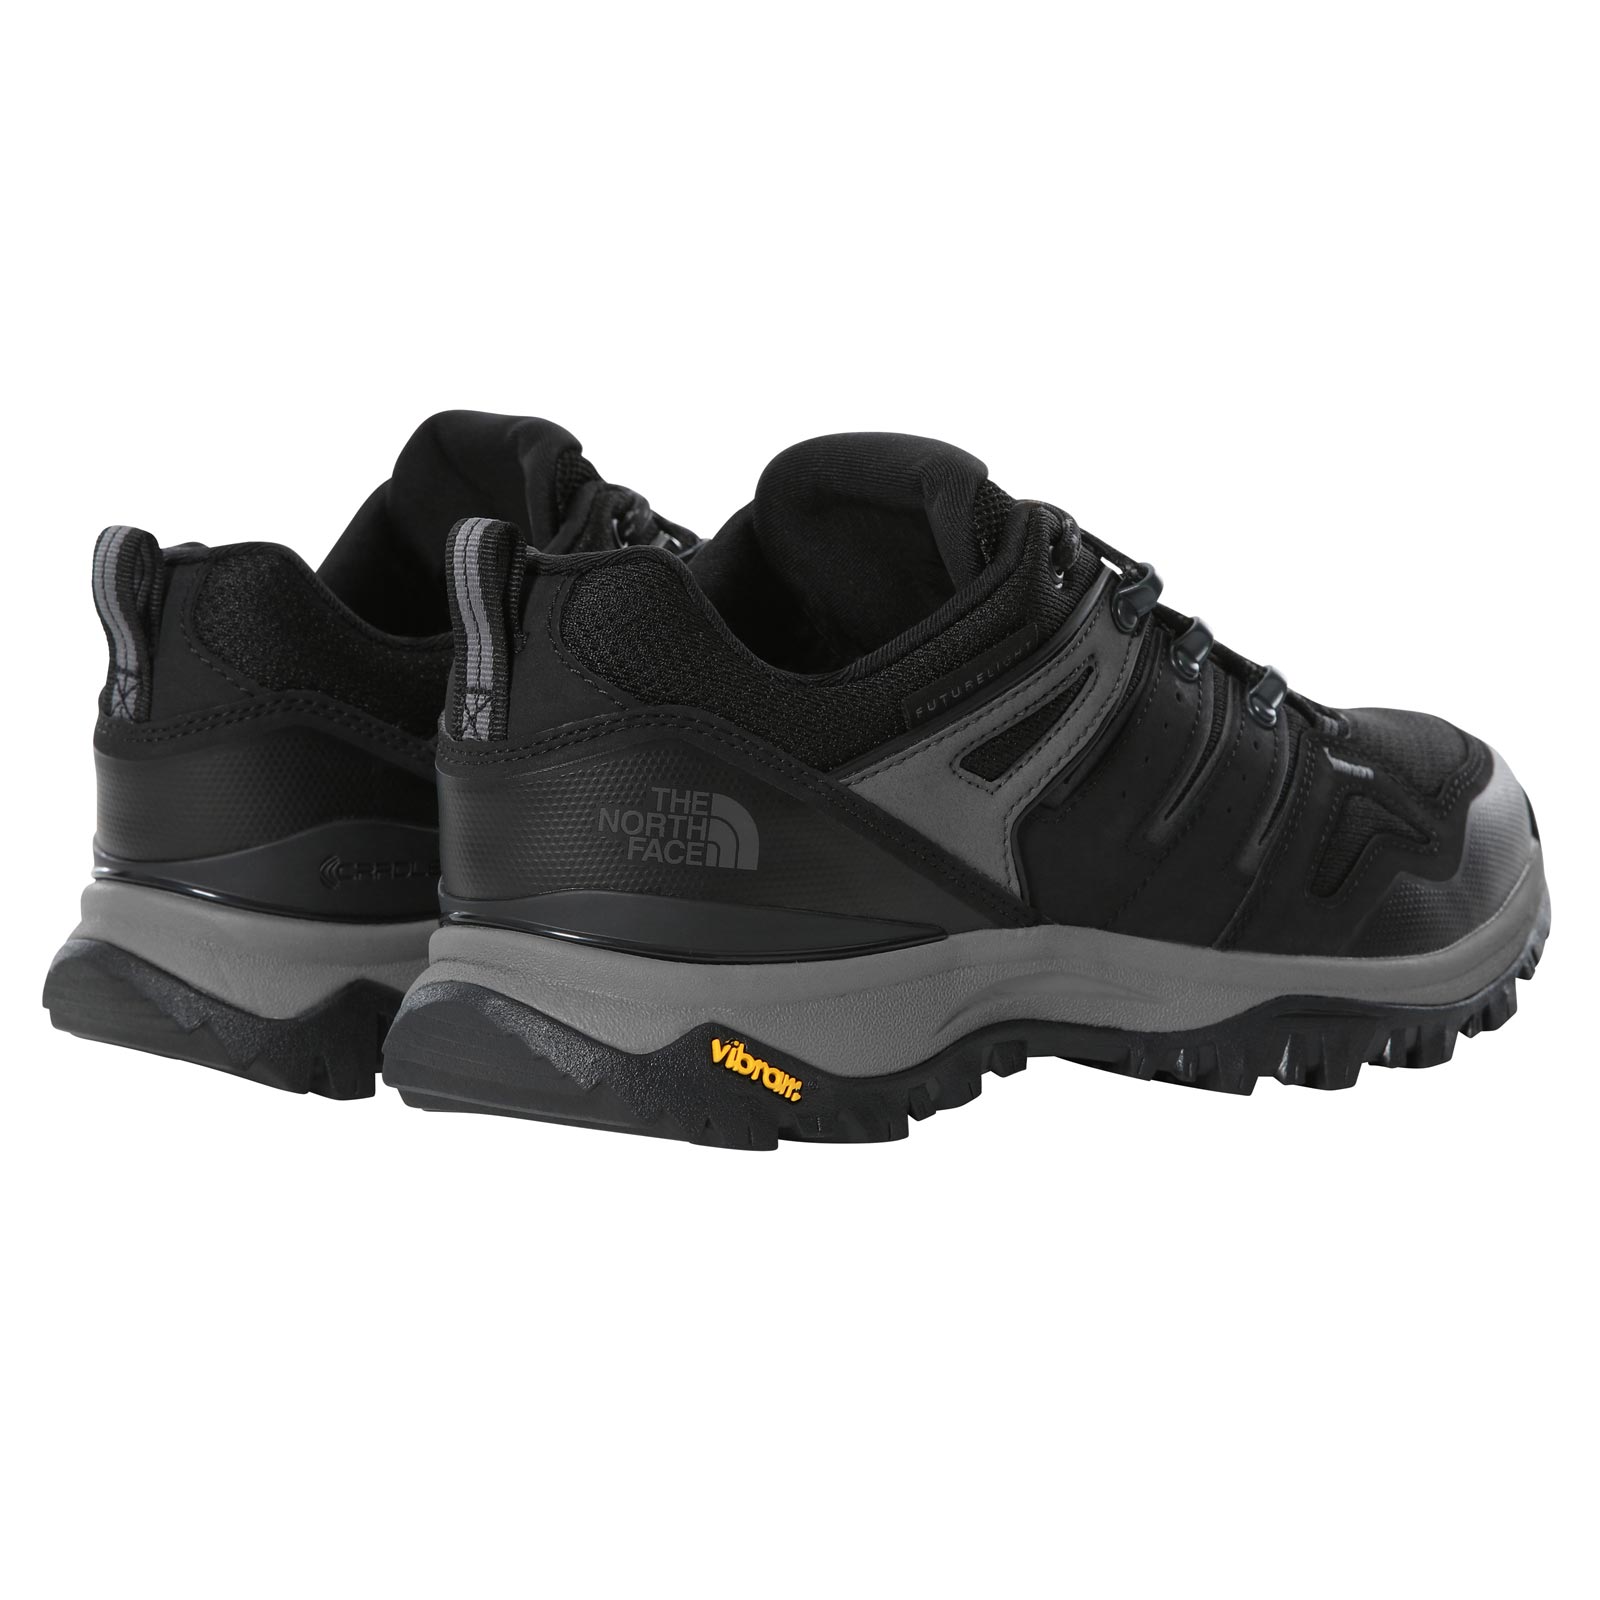 THE NORTH FACE HEDGEHOG FUTURELIGHT MENS WALKING SHOES